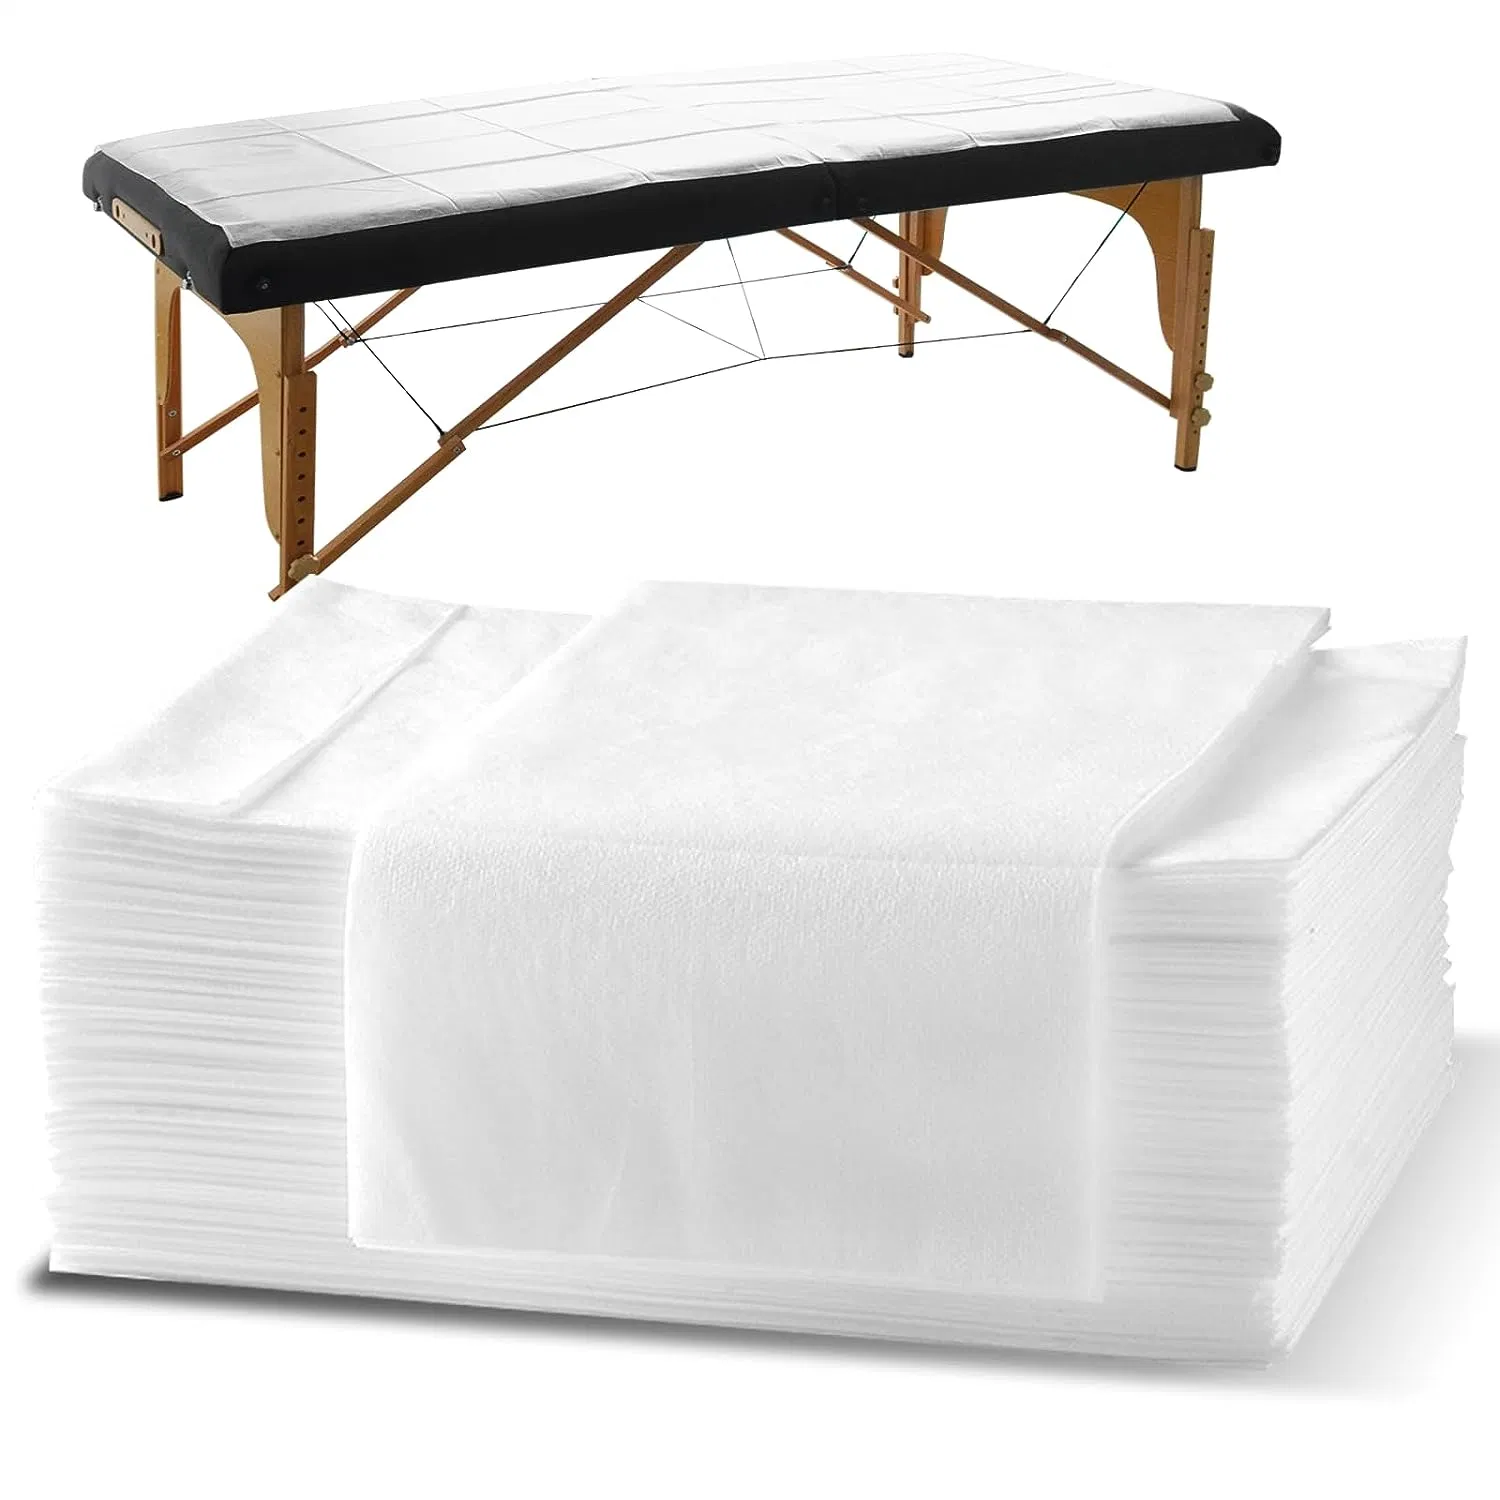 Massage Bed Cover Table Sheet for Massage SPA Examining Table Waterproof -Disposable Bed Sheets Beddings